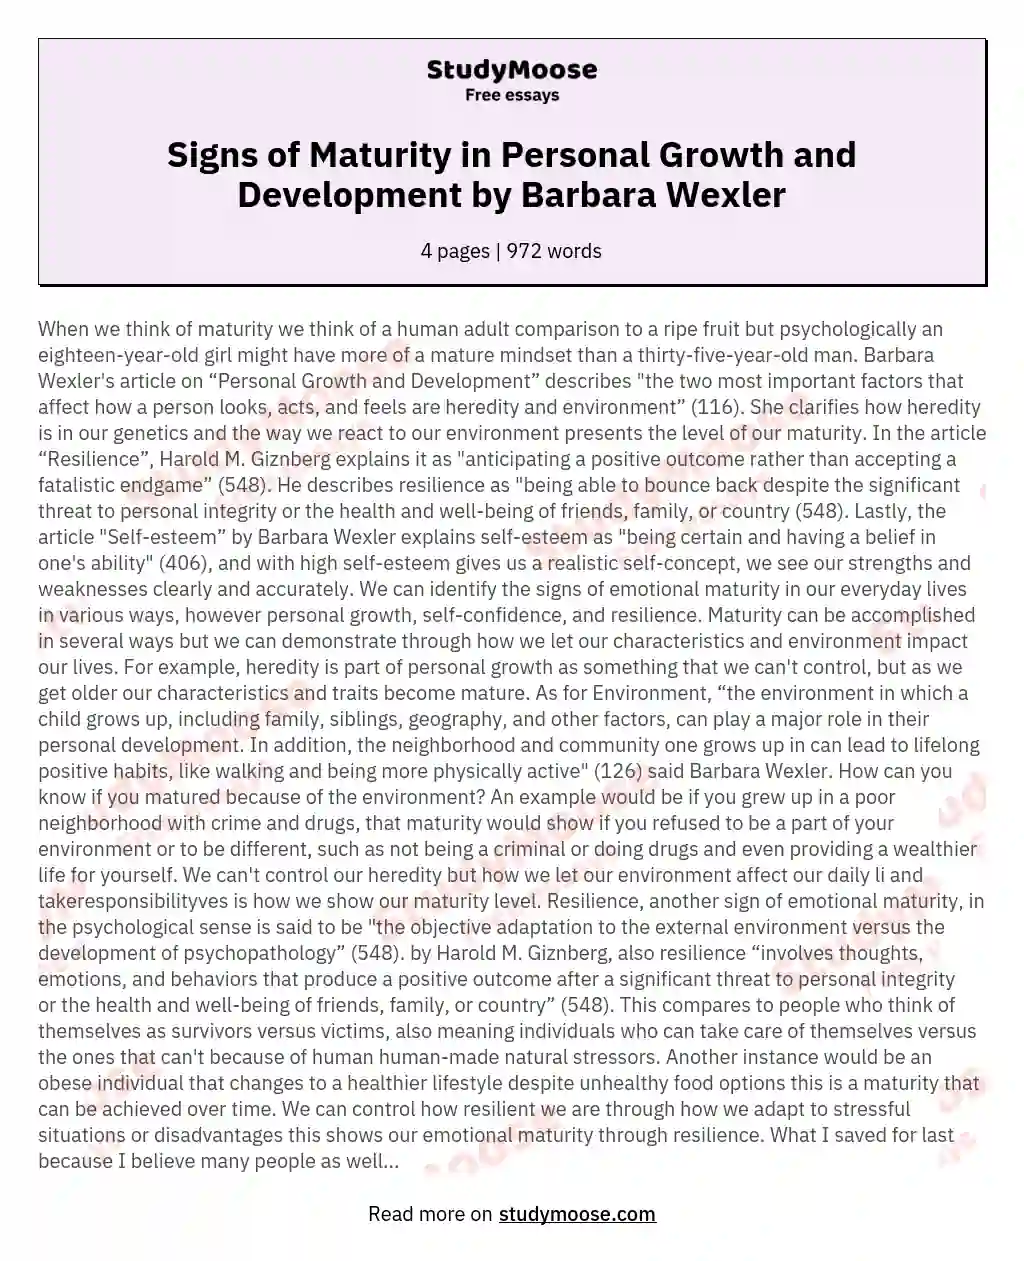 Signs of Maturity in Personal Growth and Development by Barbara Wexler essay